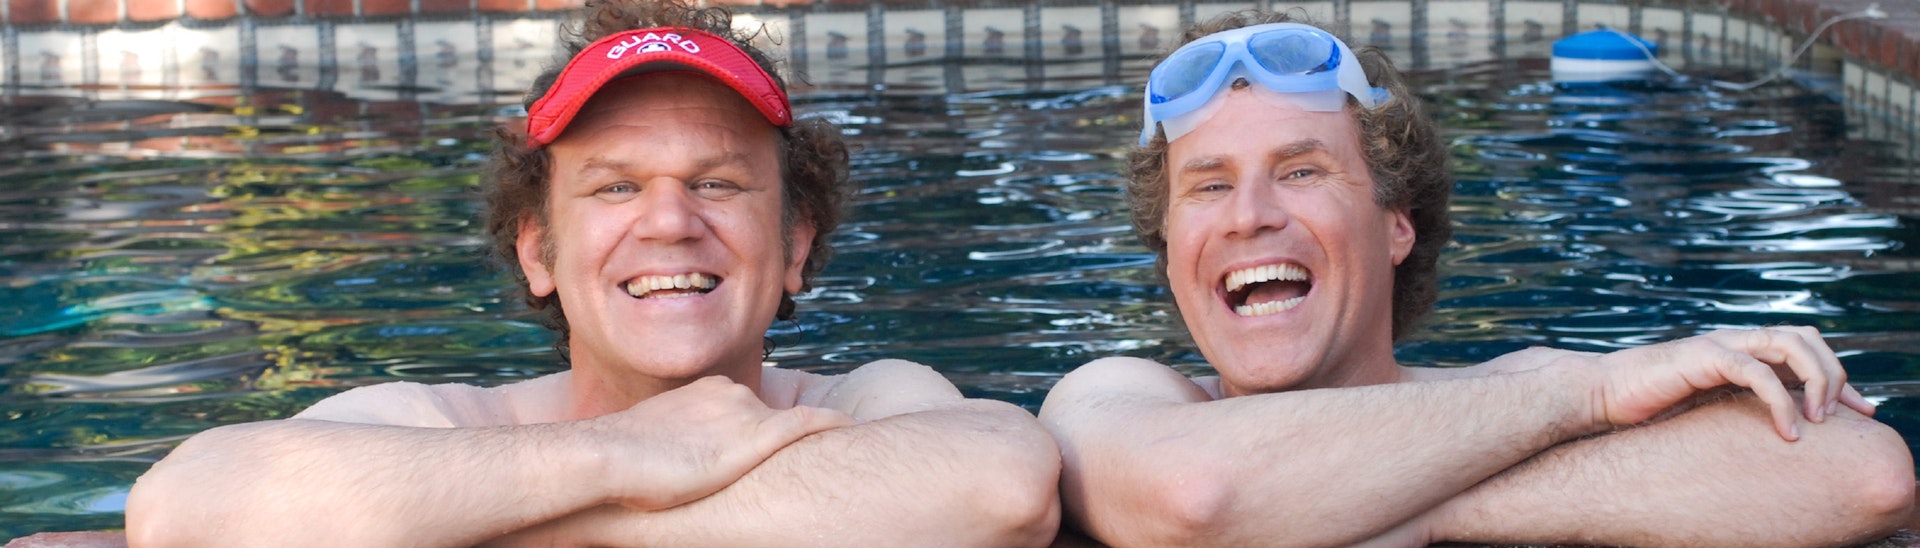 Watch Step Brothers